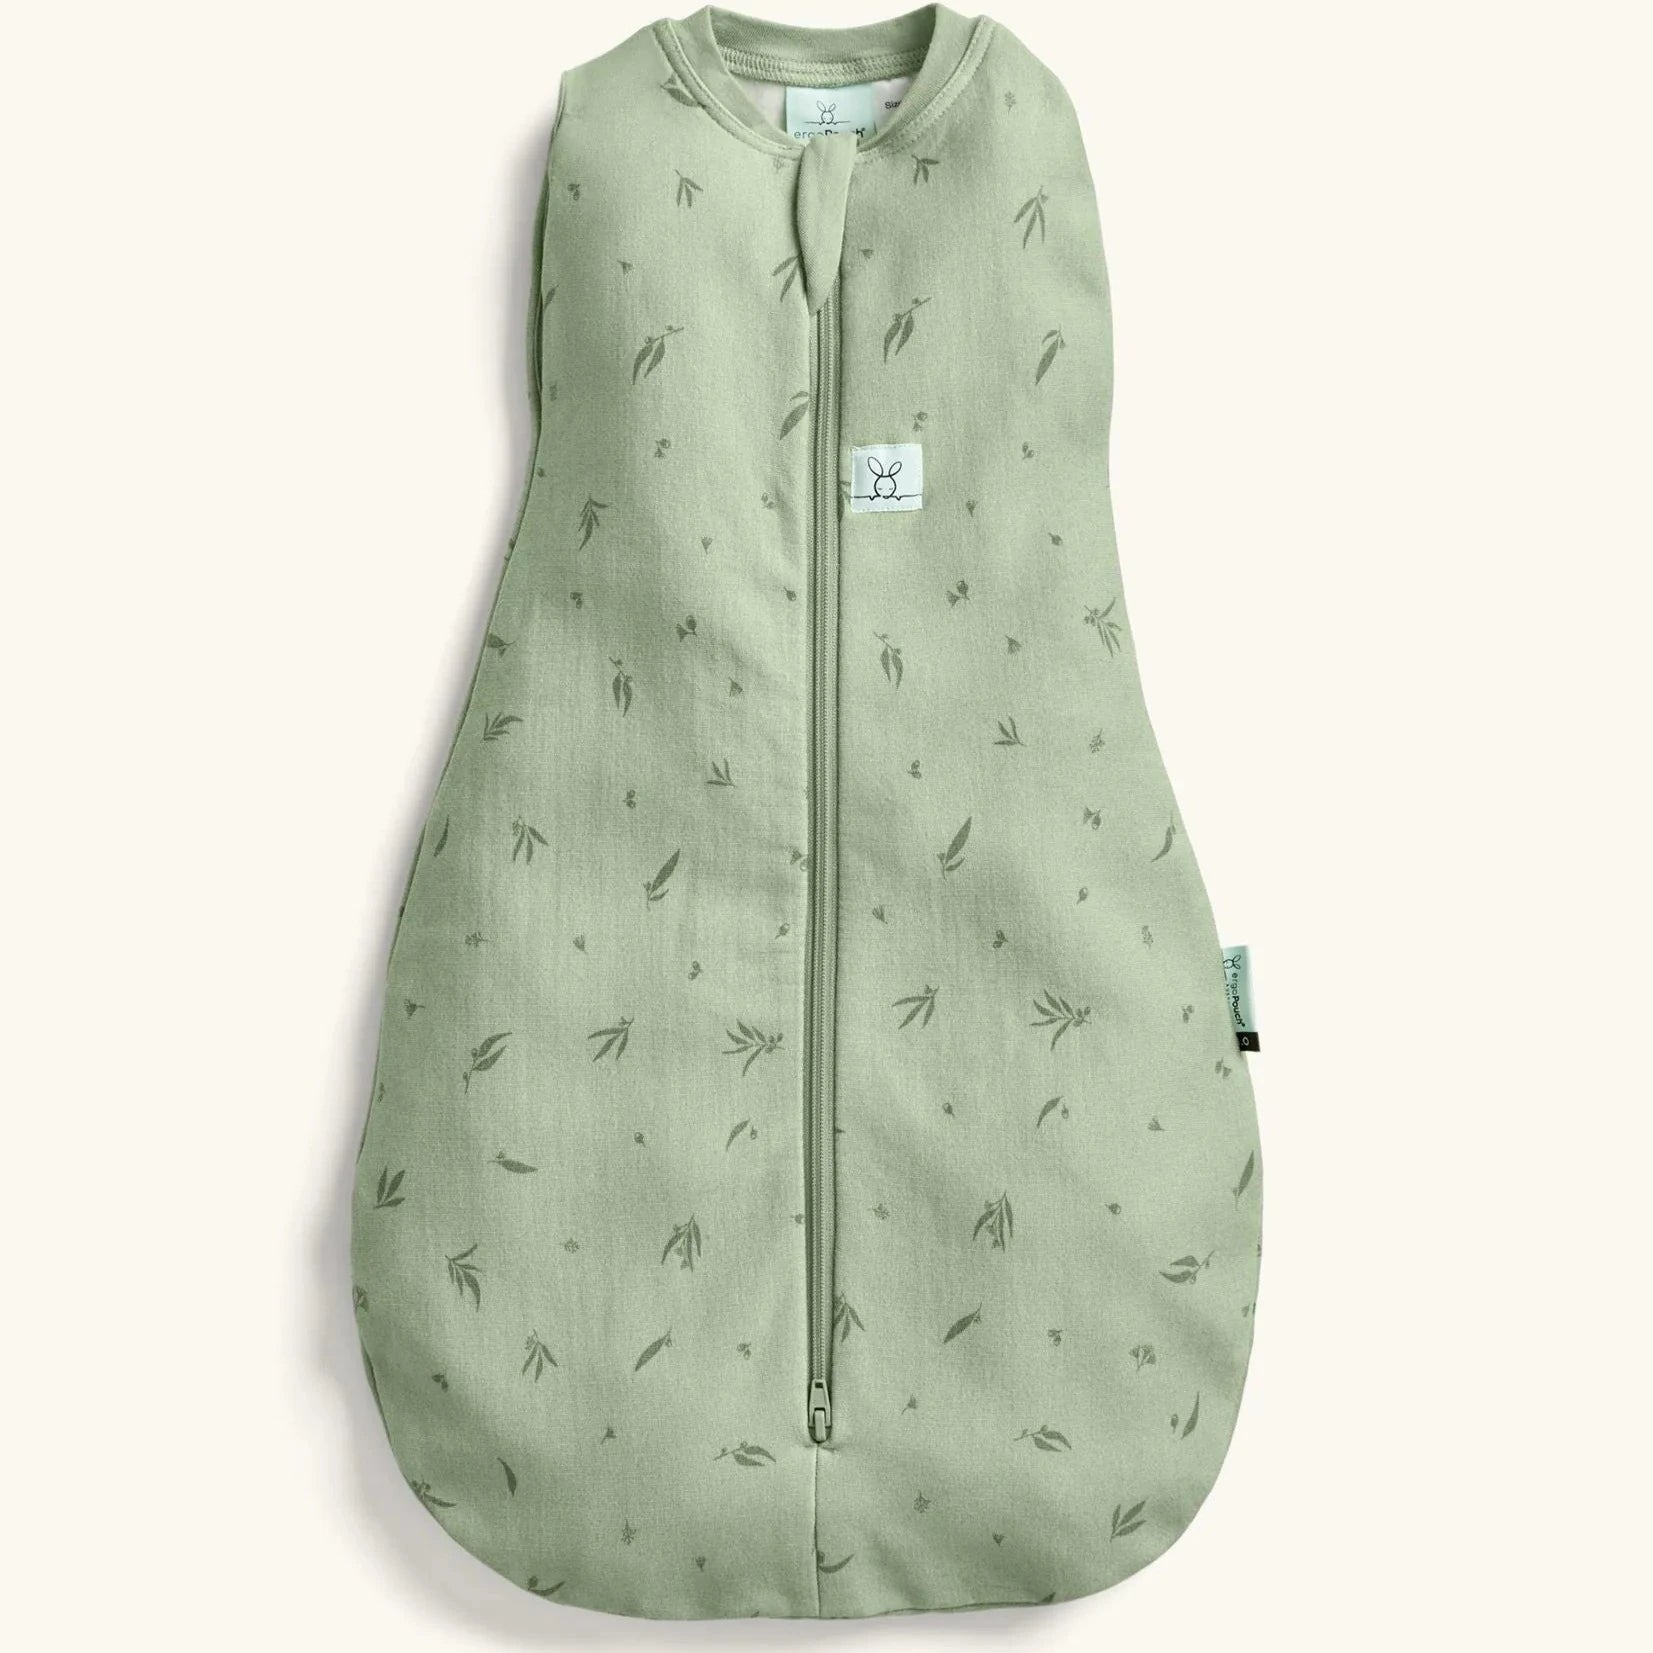 Cocoon Swaddle Bag 1.0 tog (Willow)